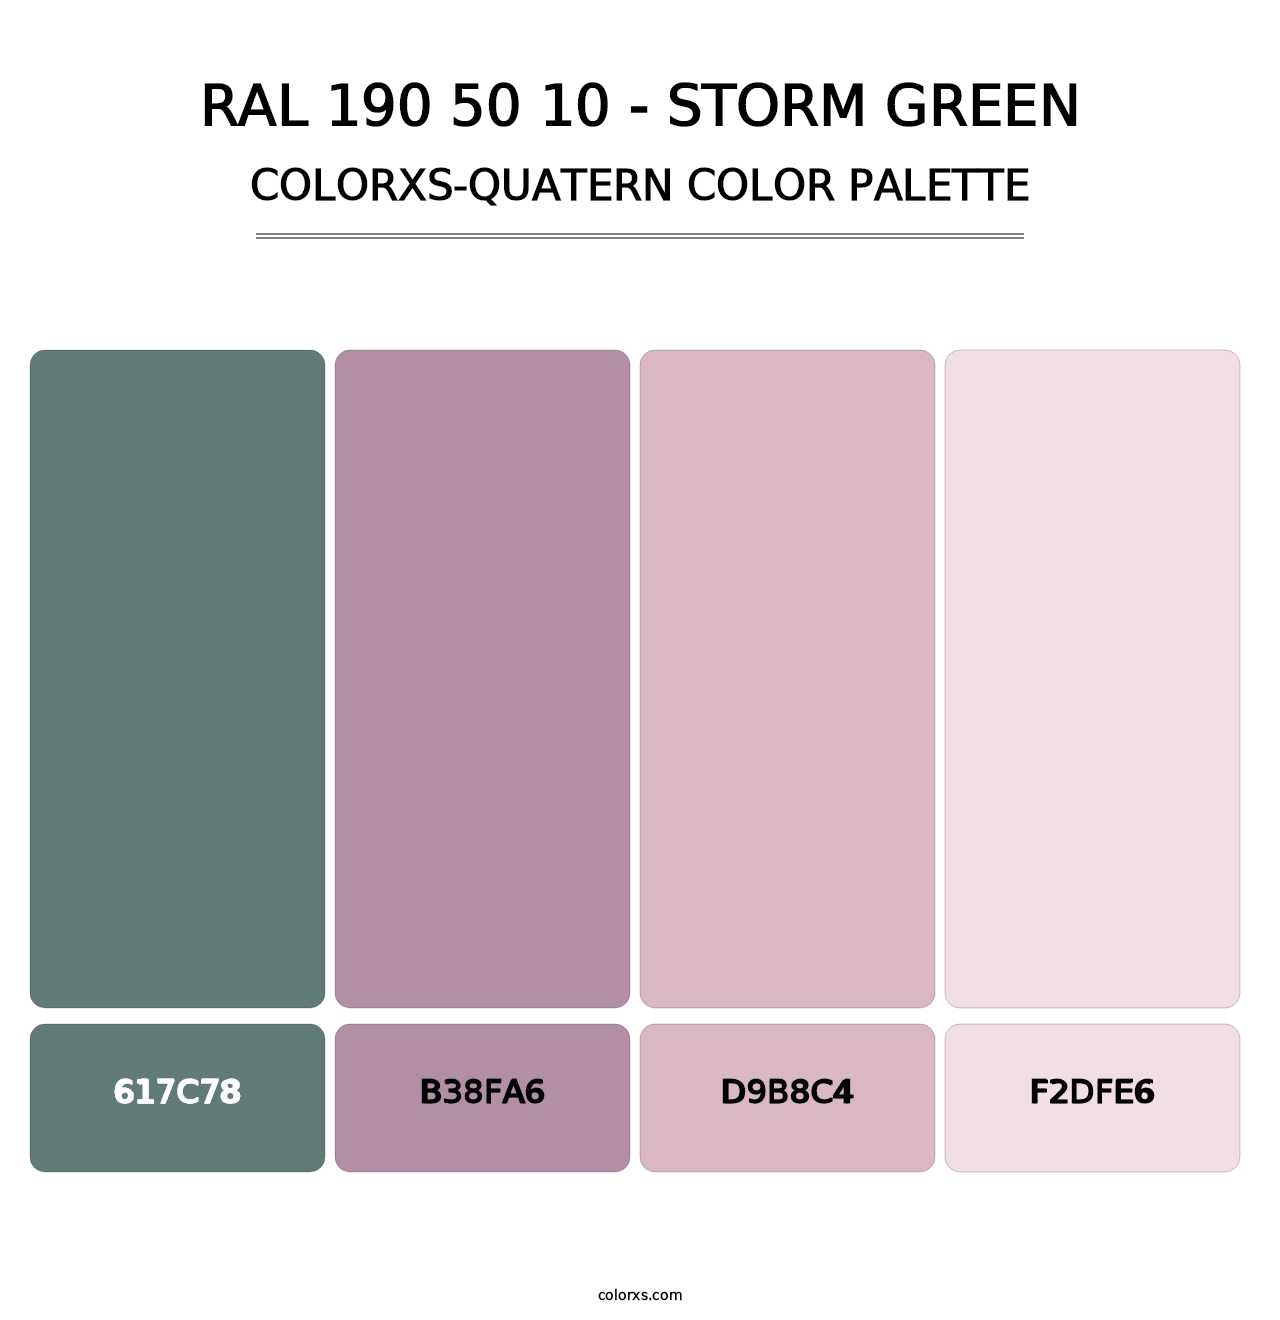 RAL 190 50 10 - Storm Green - Colorxs Quatern Palette